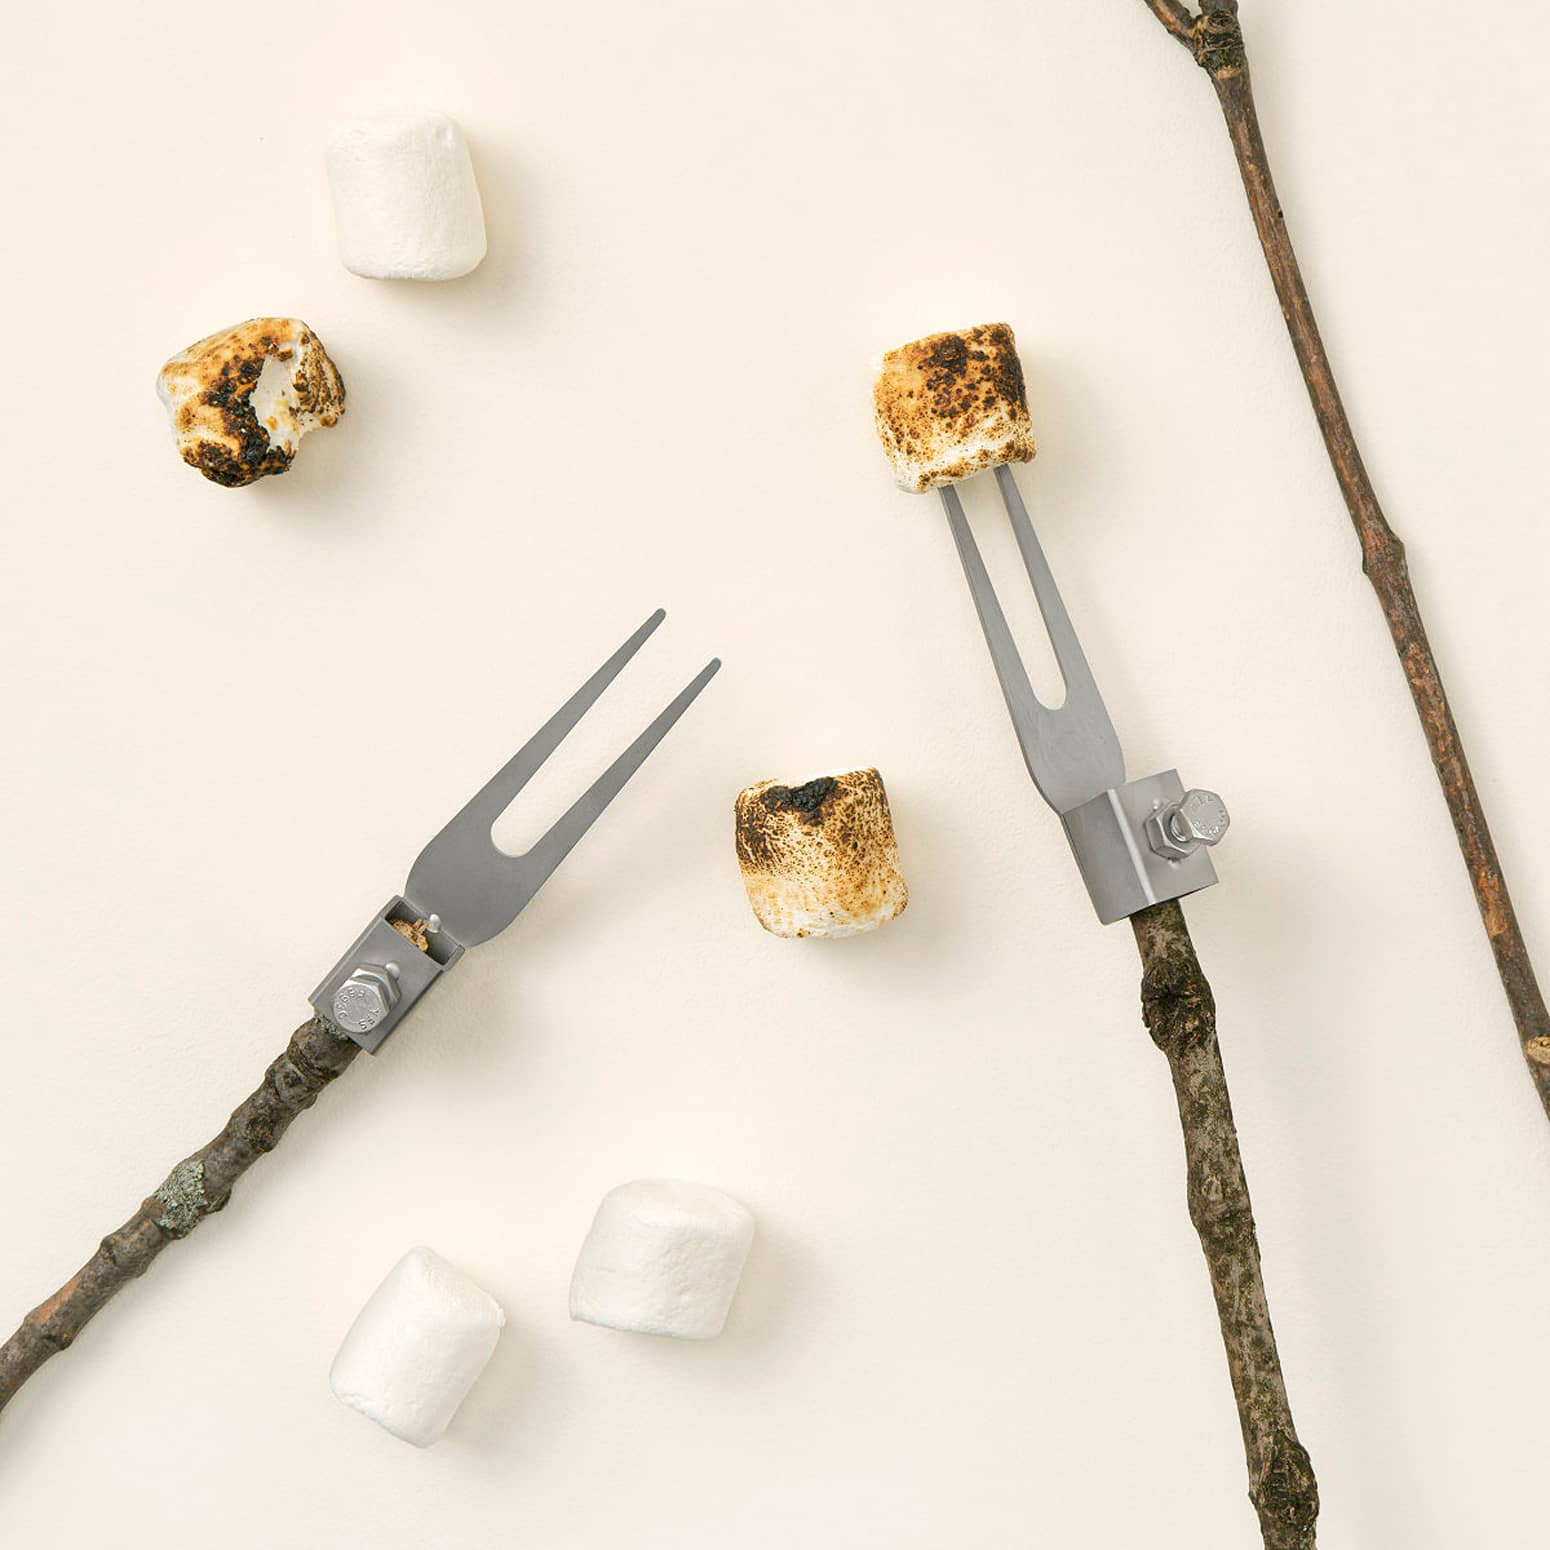 Compact Campfire Roasting Forks - Just Attach to a Tree Branch